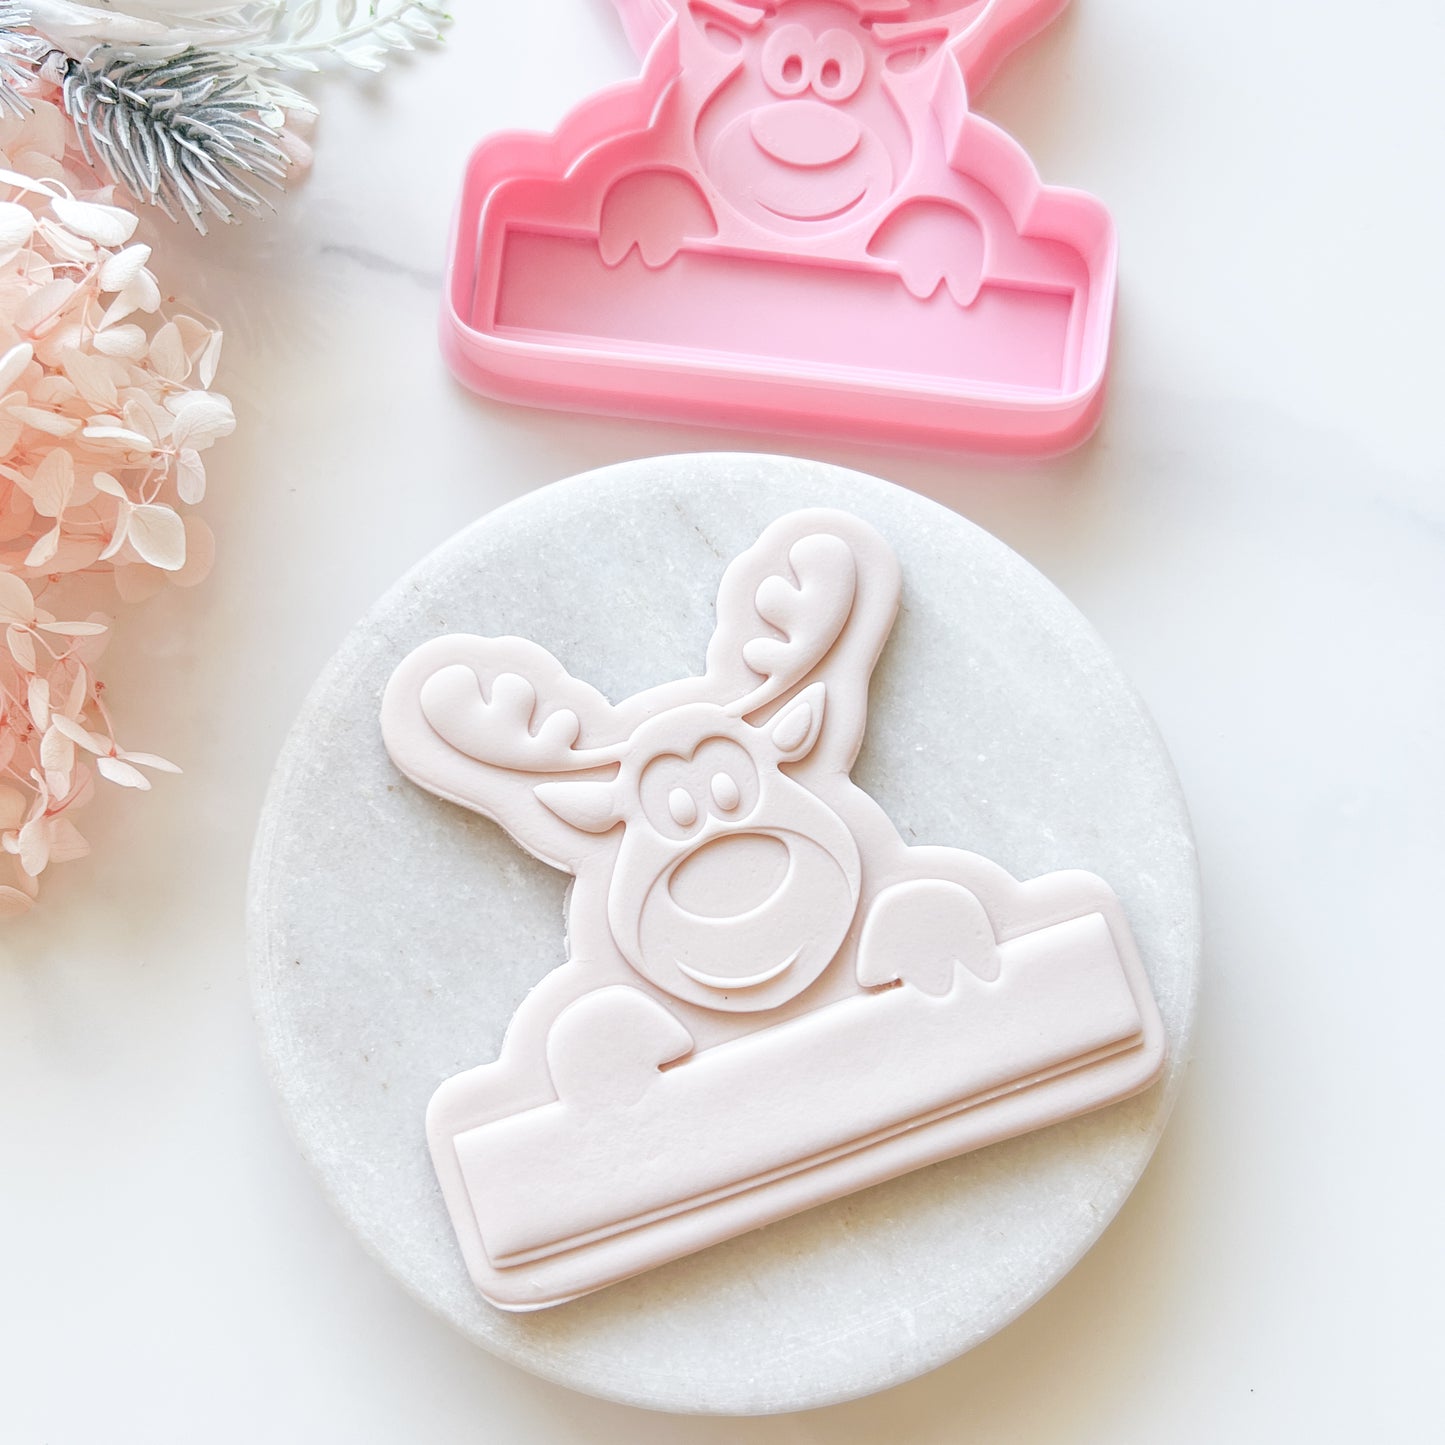 "Rudolf with Sign" - Cookie Cutter & Stamp